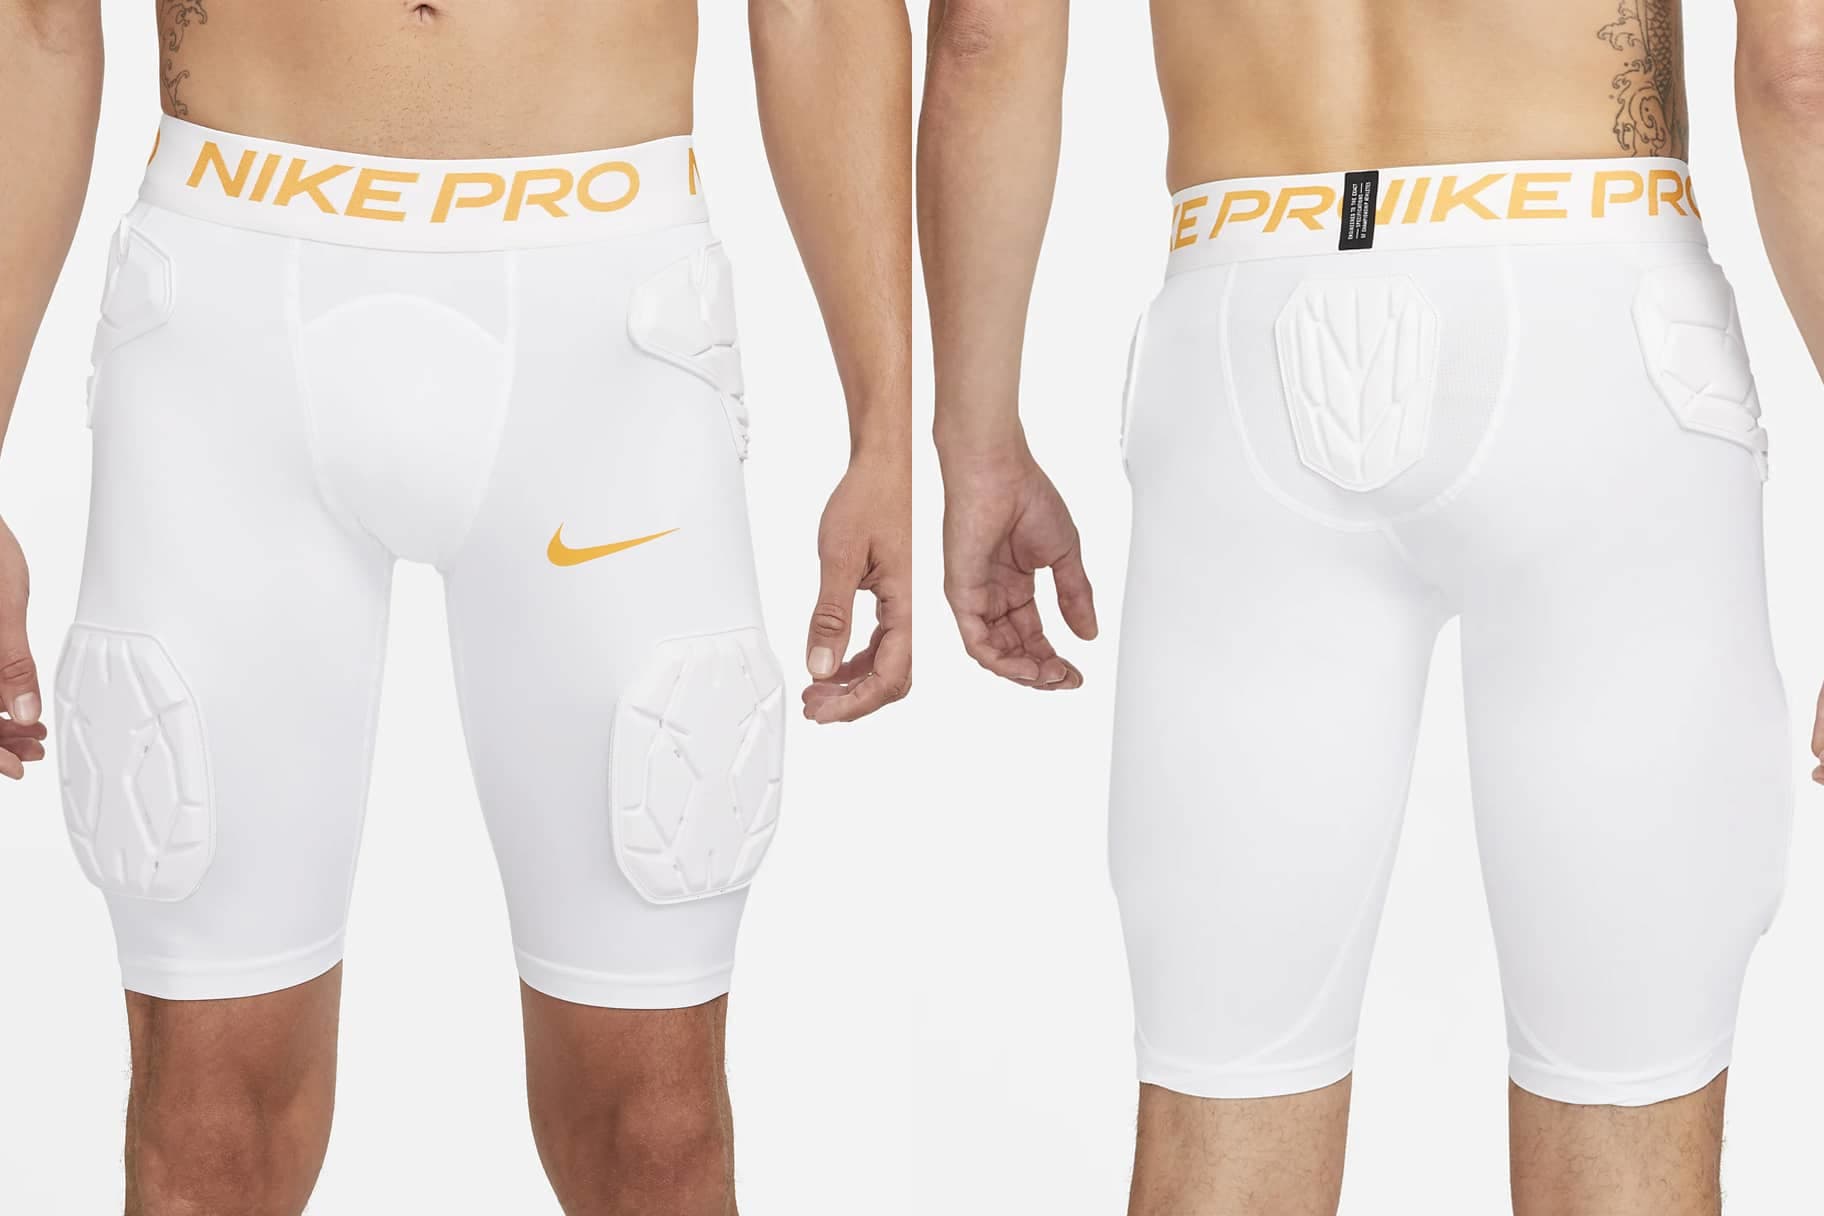 7 Pieces of Protective Football Gear From Nike Buy Now. Nike.com